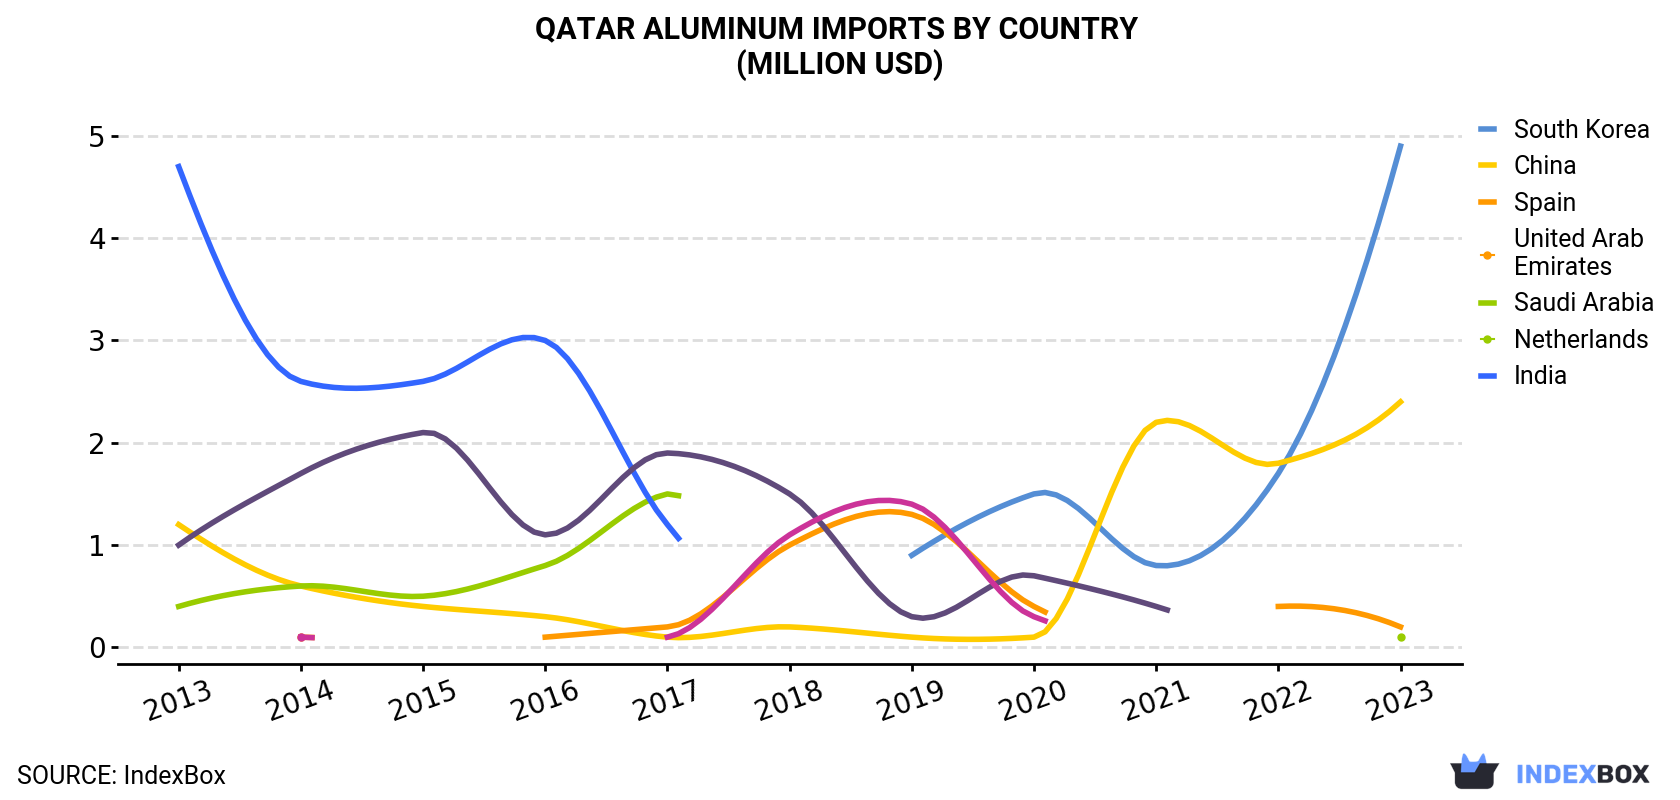 Qatar Aluminum Imports By Country (Million USD)